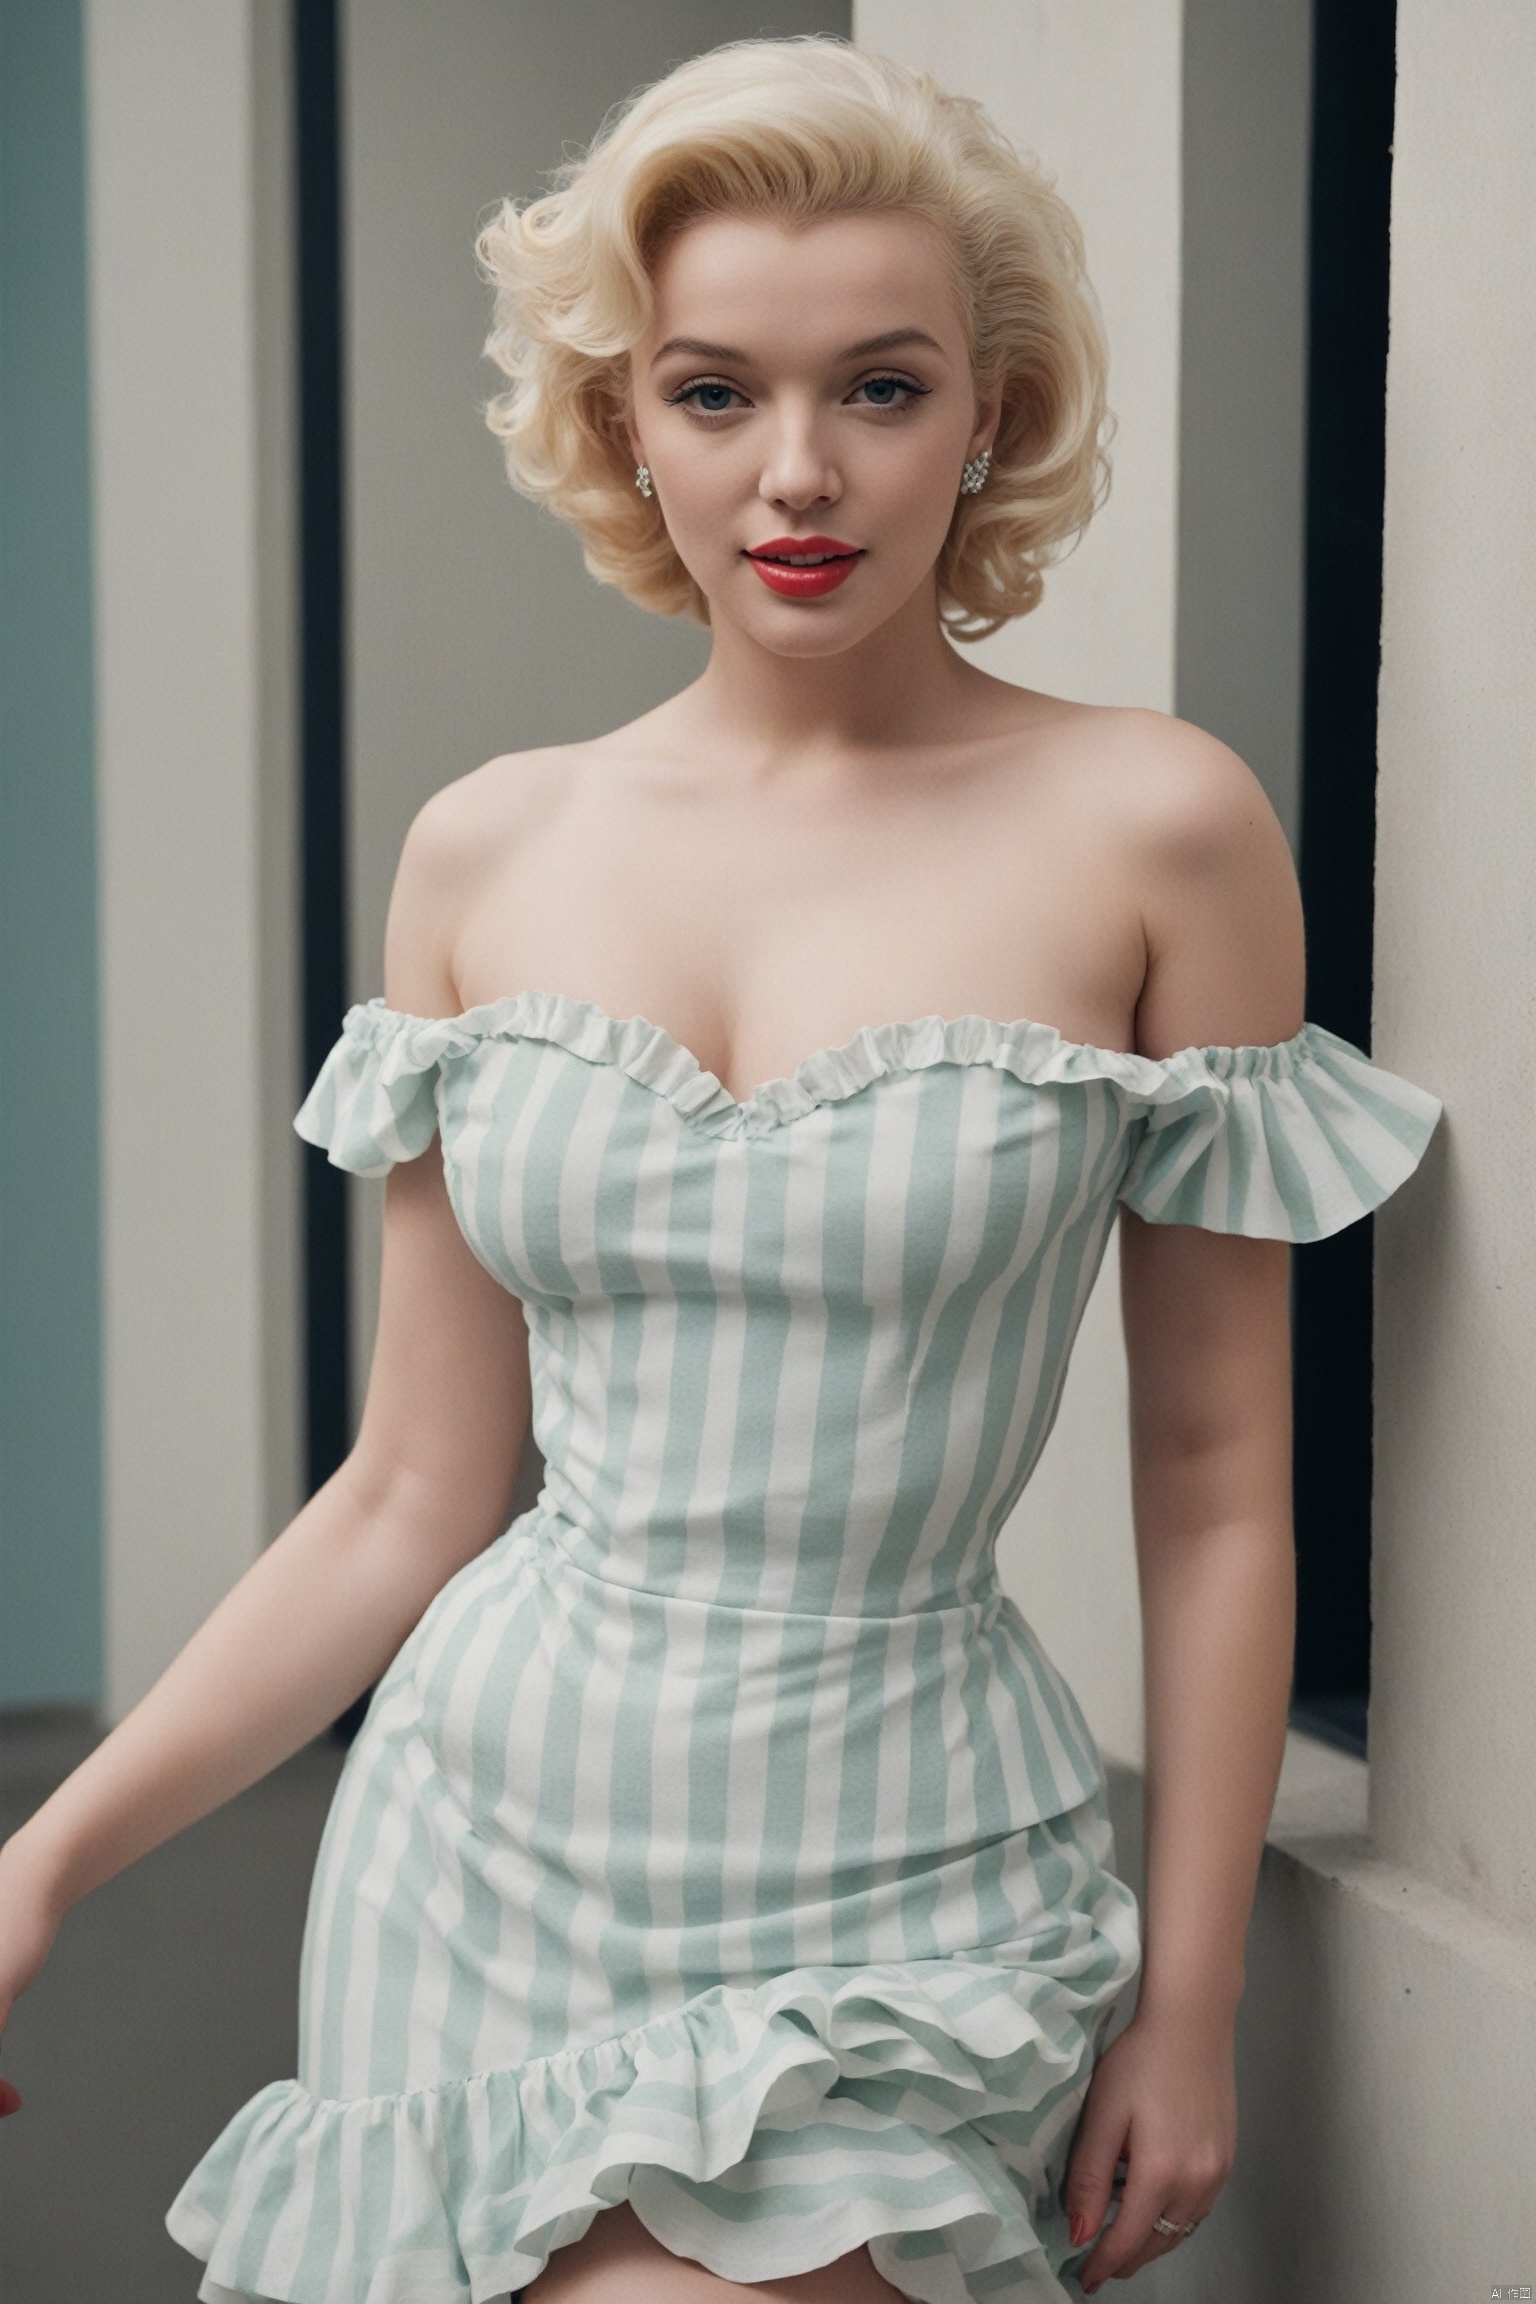  (masterpiece, best quality, hyper realistic, raw photo, ultra detailed, extremely detailed, intricately detailed), (photorealistic:1.4), (photography of Marilyn Monroe wearing a fashionable Striped off-the-shoulder ruffle hem dress, designed by Hubert de Givenchy, ), (smile), fairy, pure, innocent, beauty, (slender), super model, adr, Breakfast at Tiffany's,Sabrina,(glide_fashion),depthoffield,(fullshot),filmgrain,zeisslens,symmetrical,8kresolution,octanerender(OC渲染),extremelyhigh-resolutiondetails,finetexture,dynamicangle,fashion(时尚), fashion,,